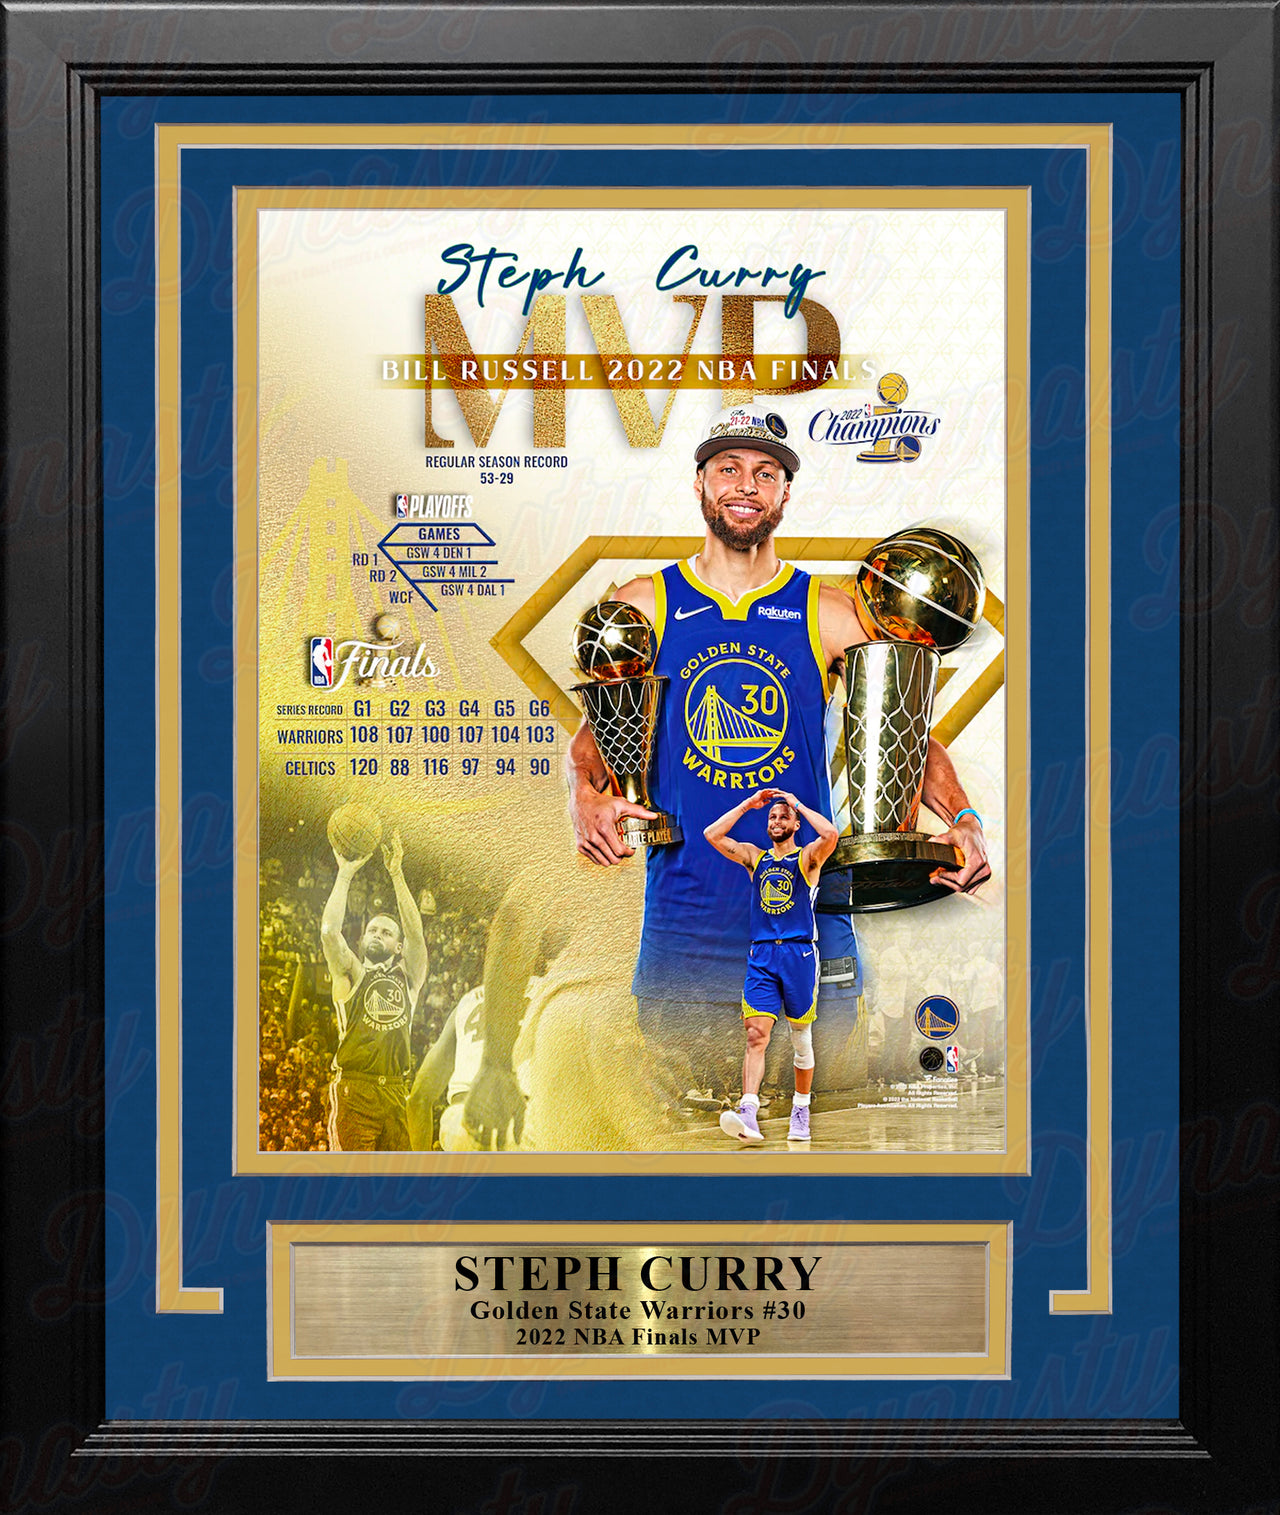 Steph Curry Golden State Warriors 2022 NBA Finals MVP 8" x 10" Framed Basketball Collage Photo - Dynasty Sports & Framing 